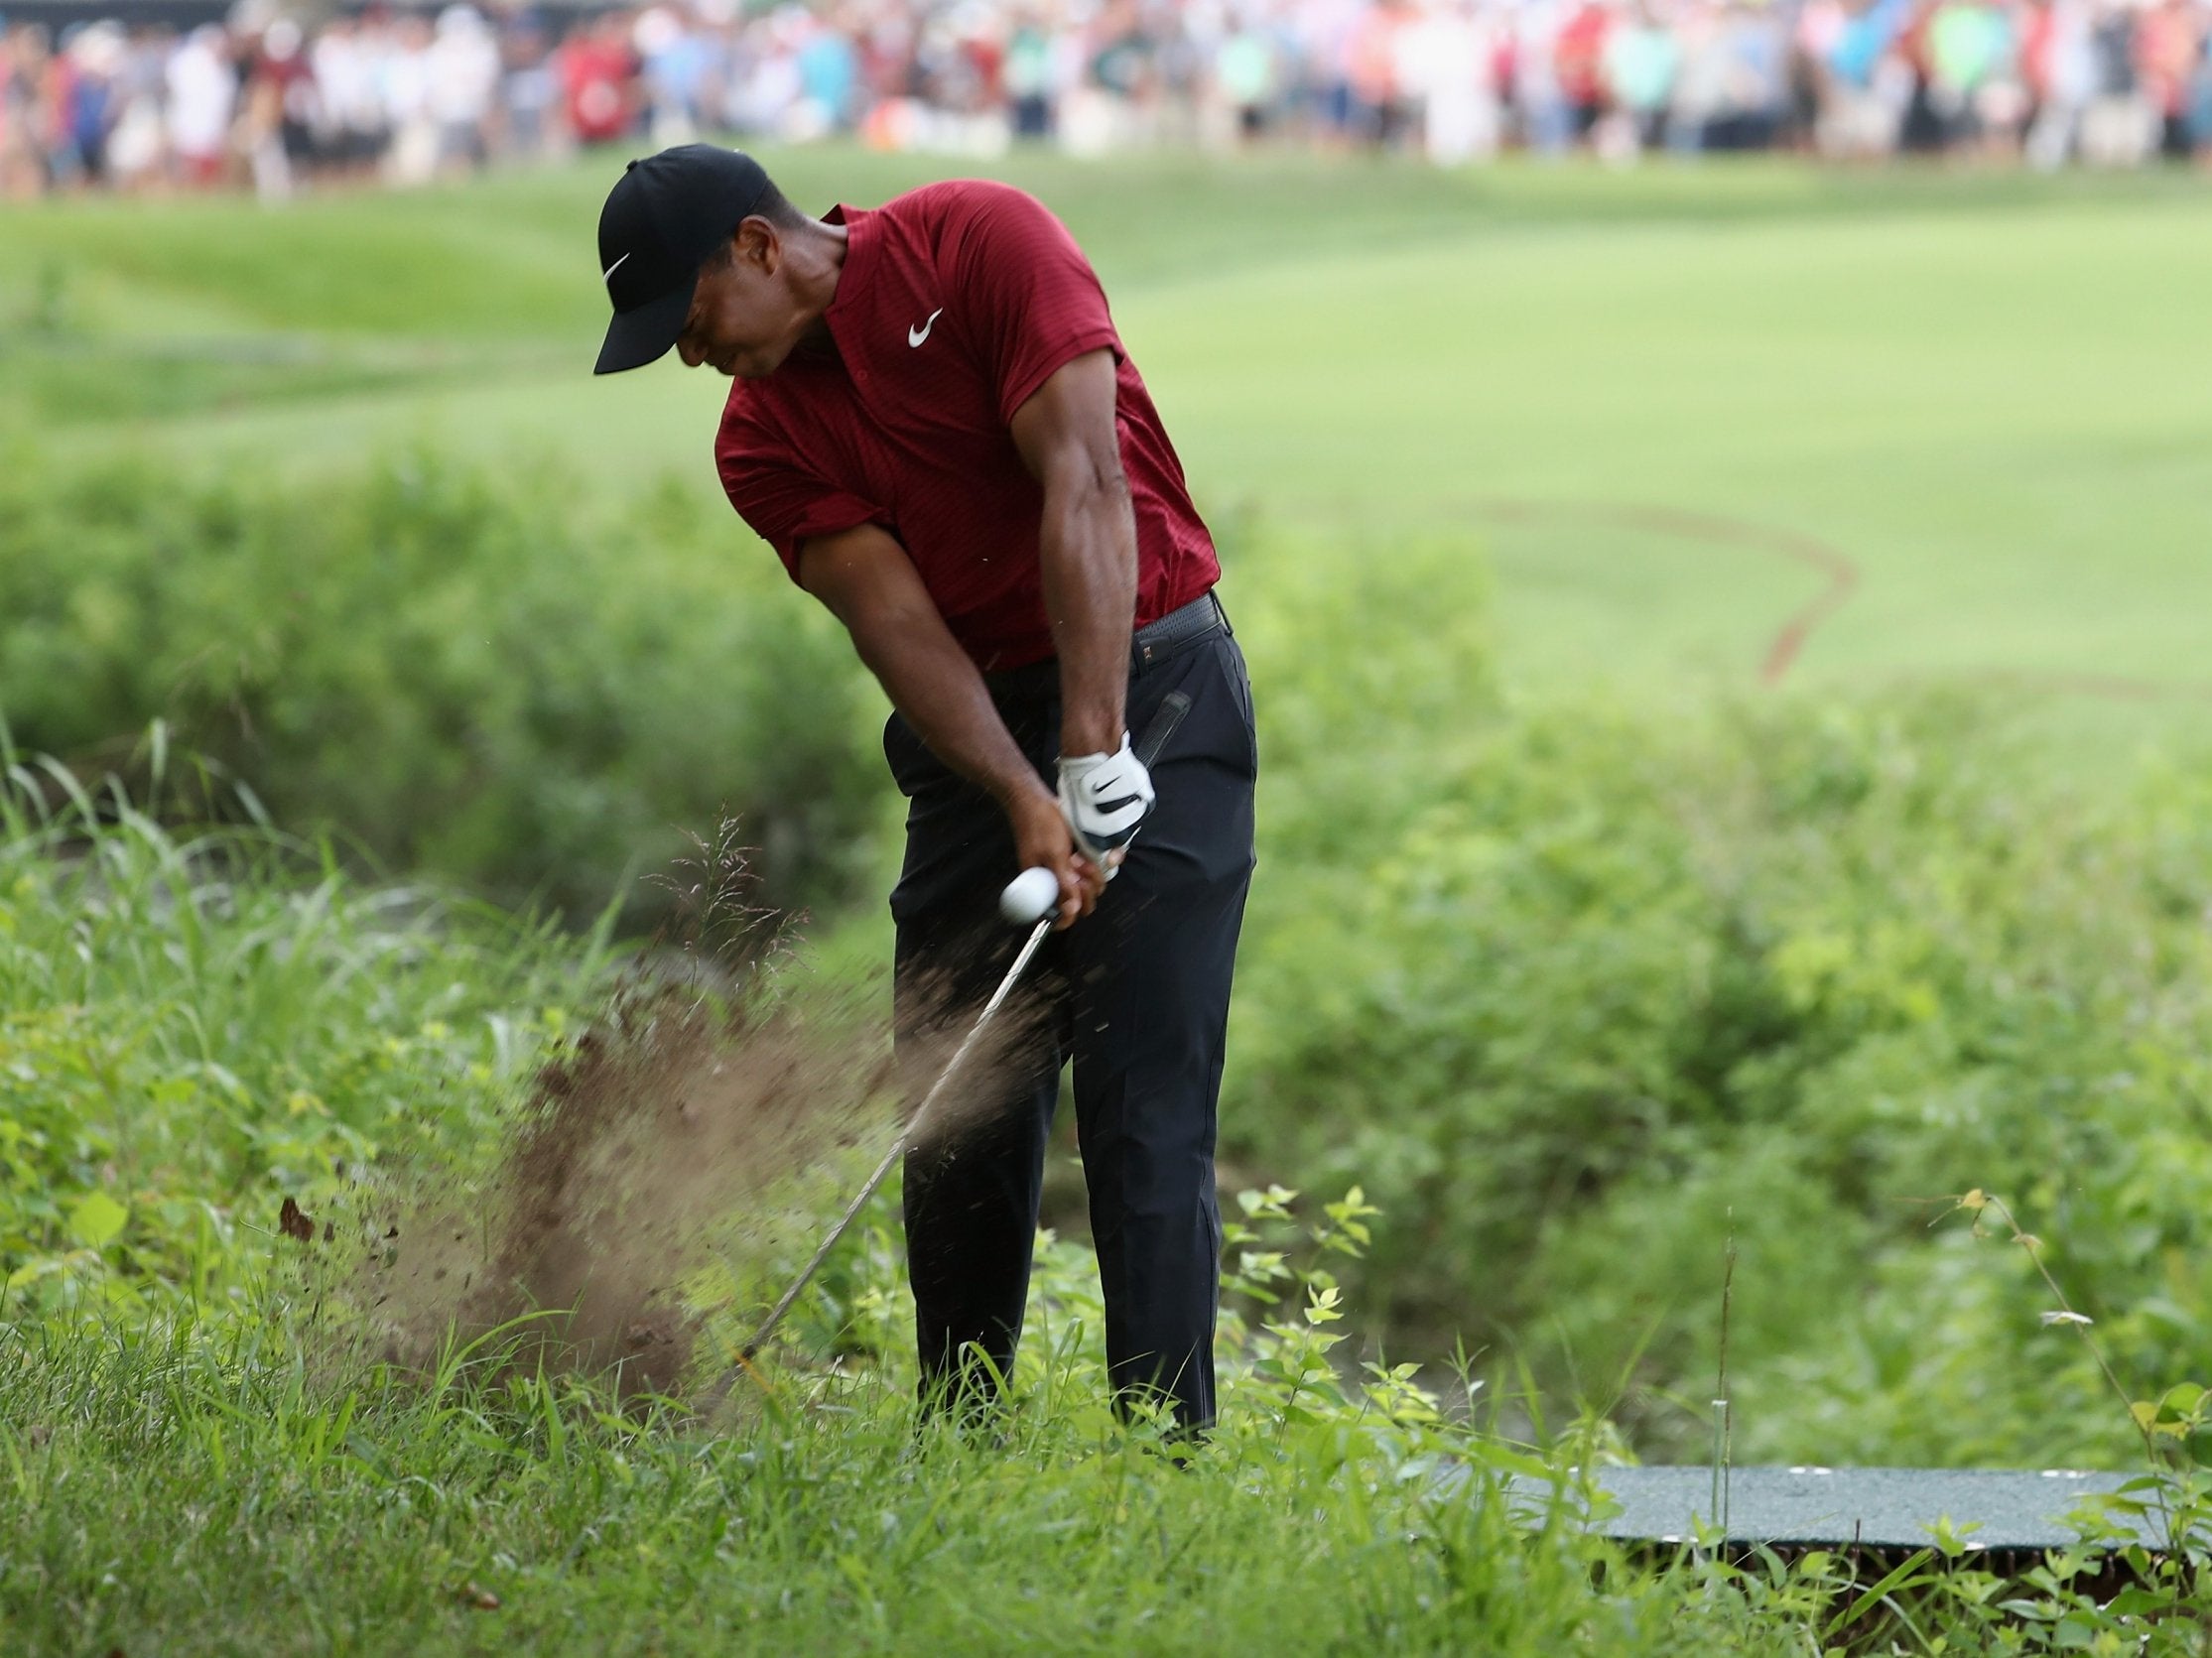 Tiger Woods endured a difficult day off the tee that cost him victory